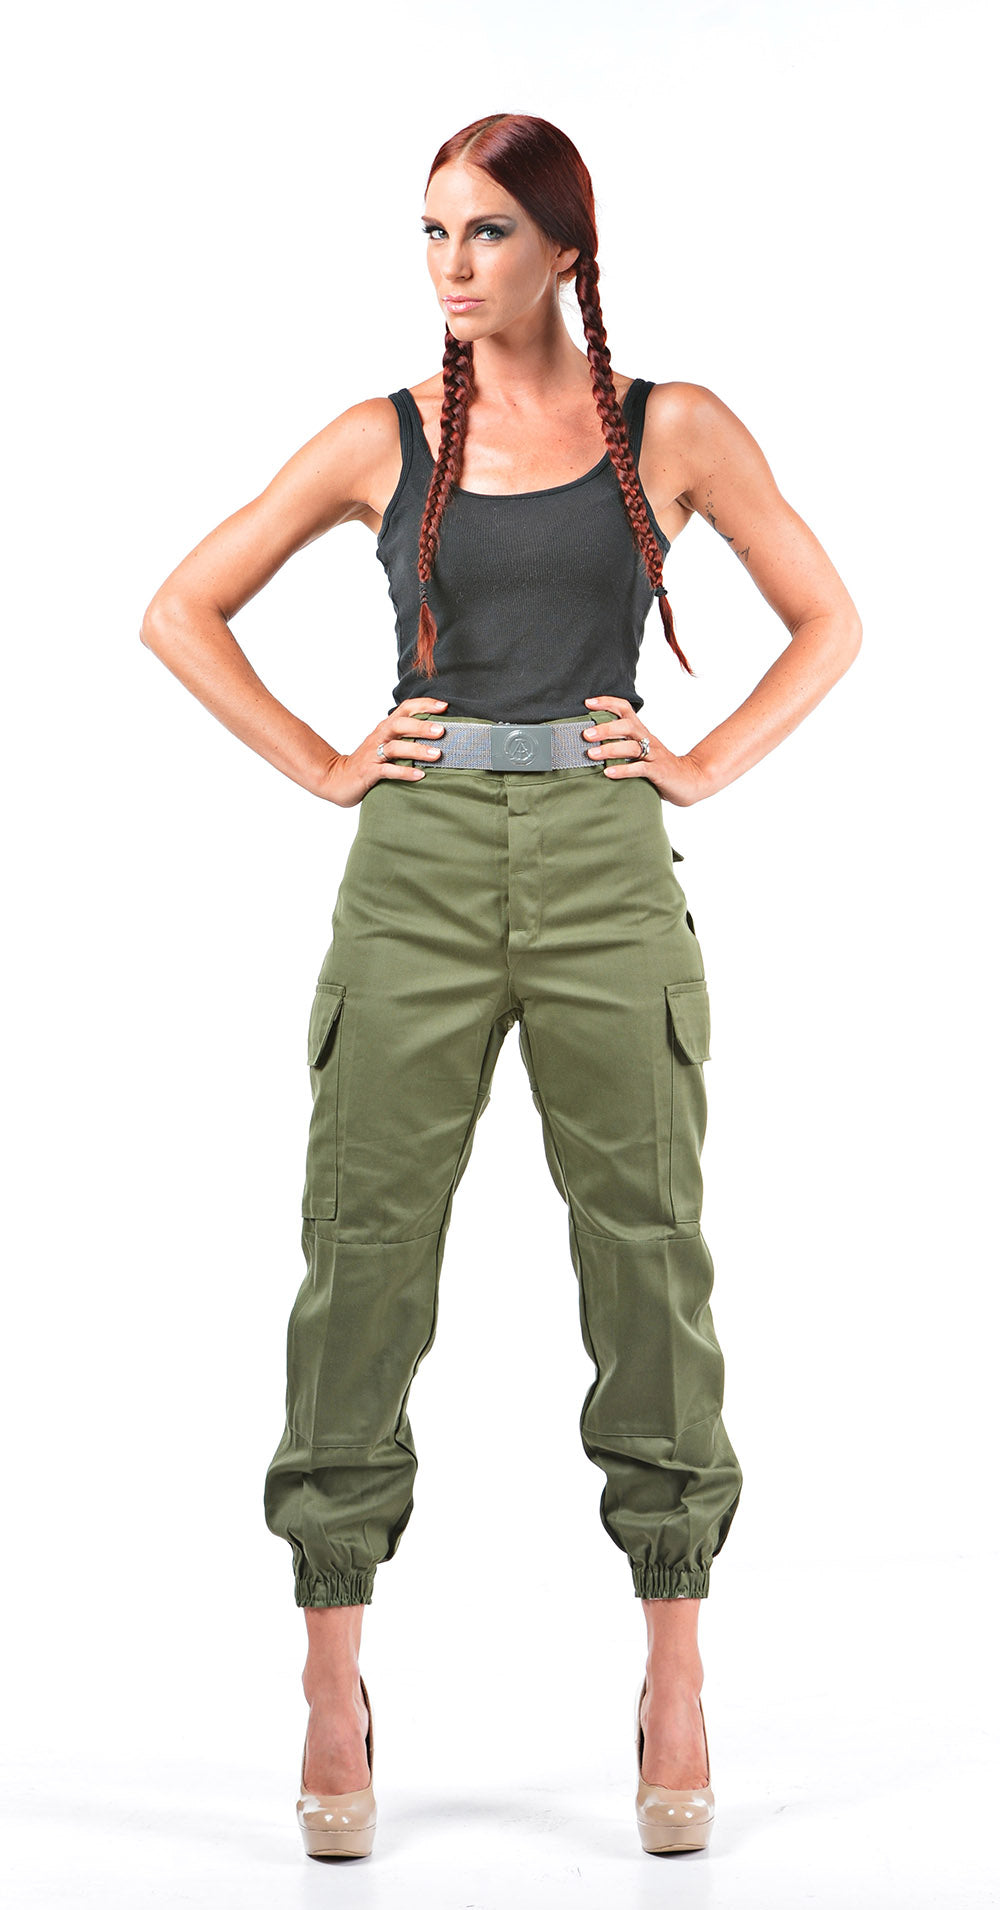 NEW LADIES CAMOUFLAGE CAMO LOOK DOUBLE SIDE POCKET CARGO COMBAT TROUSERS  PANTS | eBay